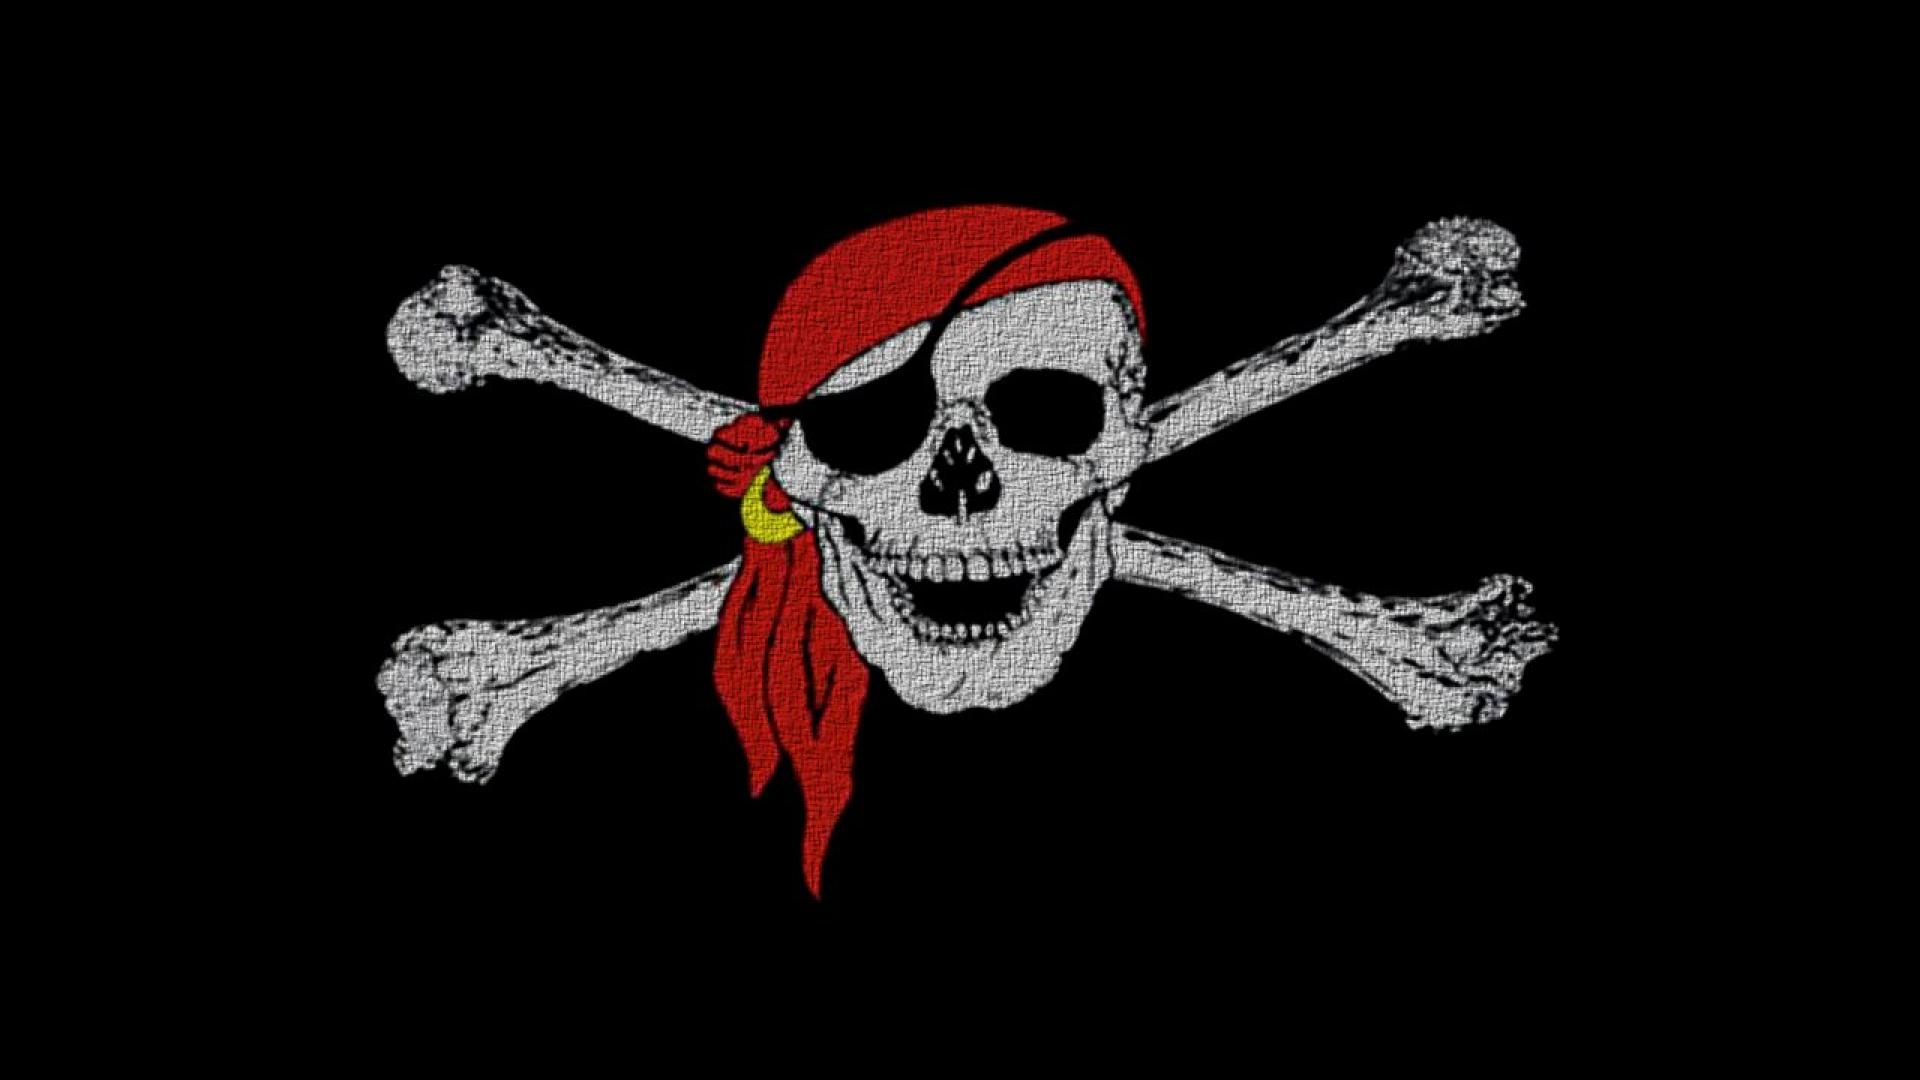 Skull and crossbones wallpaper - (#180552) - High Quality and ...